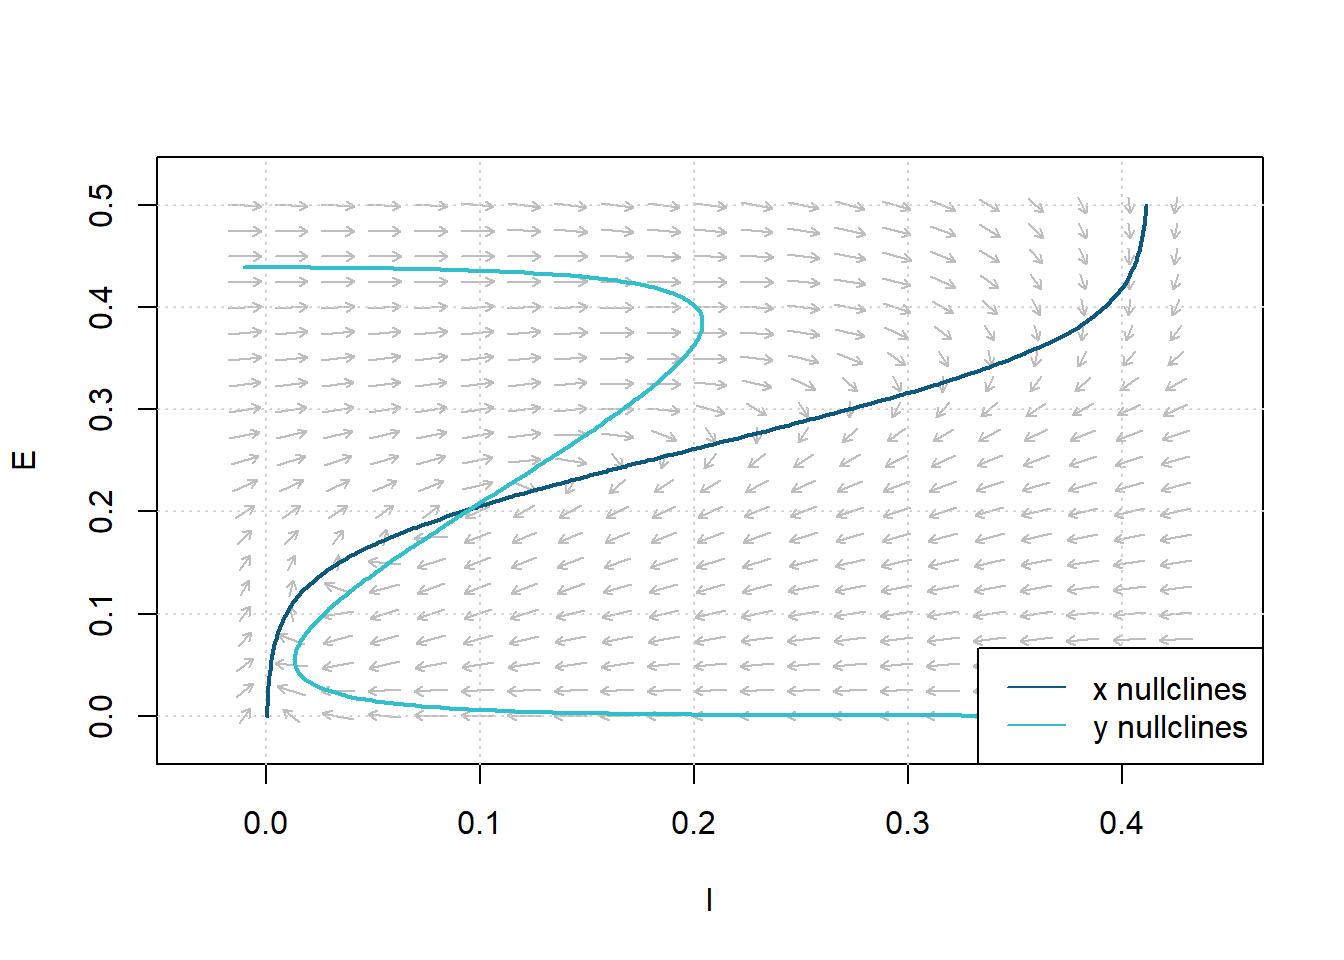 Figure  10: Phase Plane Analysis. Determine the steady-state solution by the nullclines' intersection. Parameters: $c_1=16$, $c_2 = 12$, $c_3=15$, $c_4=3$, $a_e = 1.3$, $\theta_e=4$, $a_i=2$, $\theta_i = 3.7$, $r_e=1$, $r_i=1$.